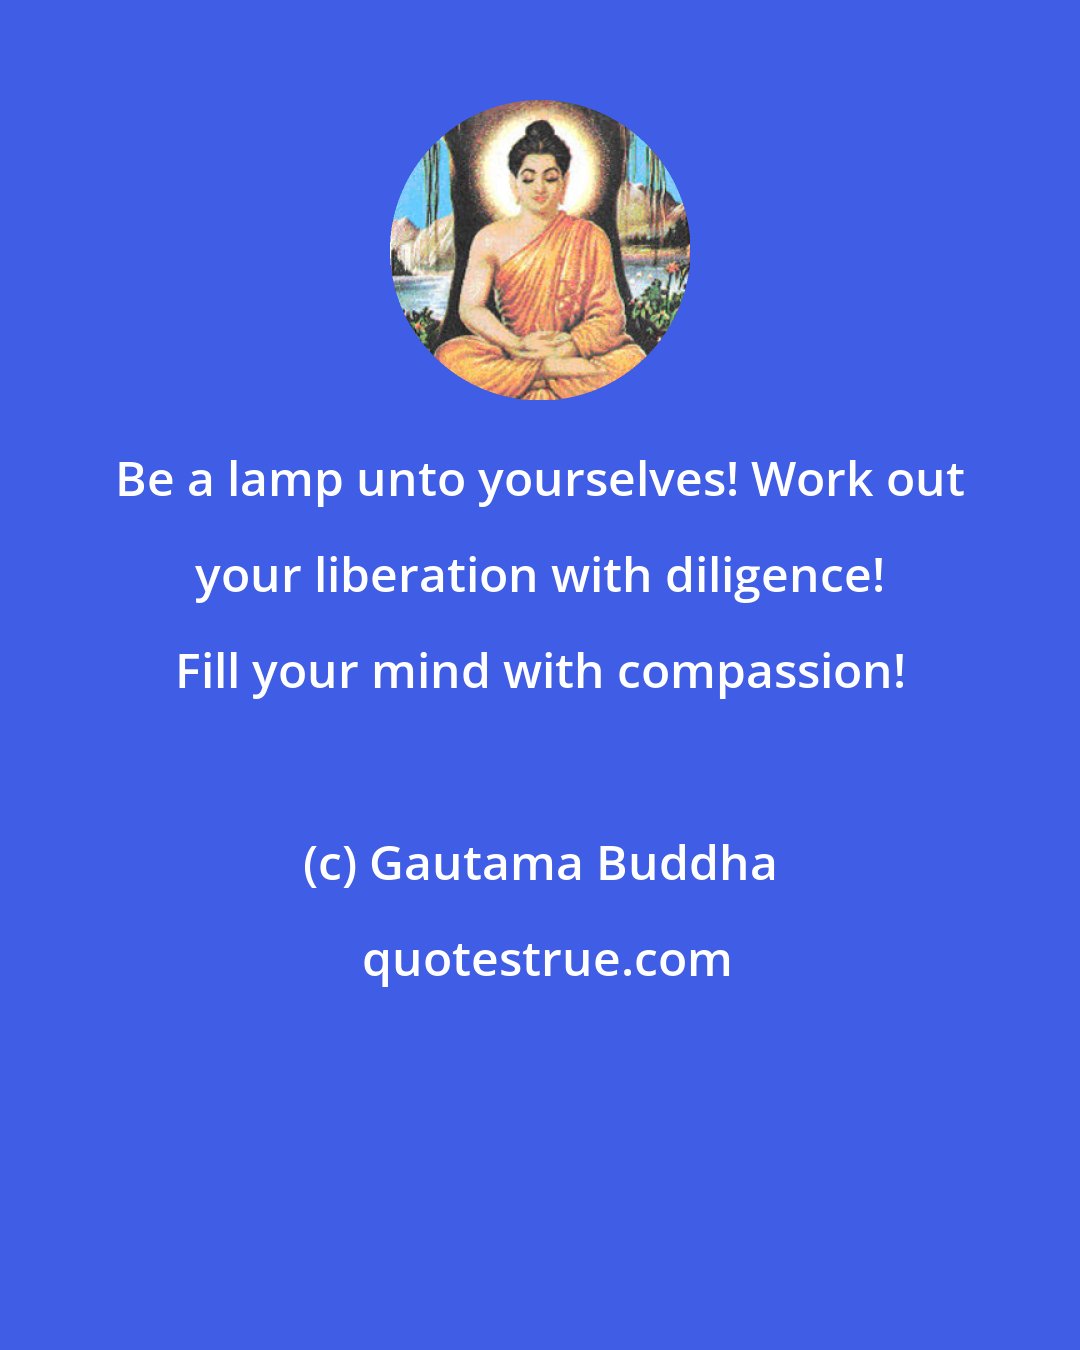 Gautama Buddha: Be a lamp unto yourselves! Work out your liberation with diligence! Fill your mind with compassion!